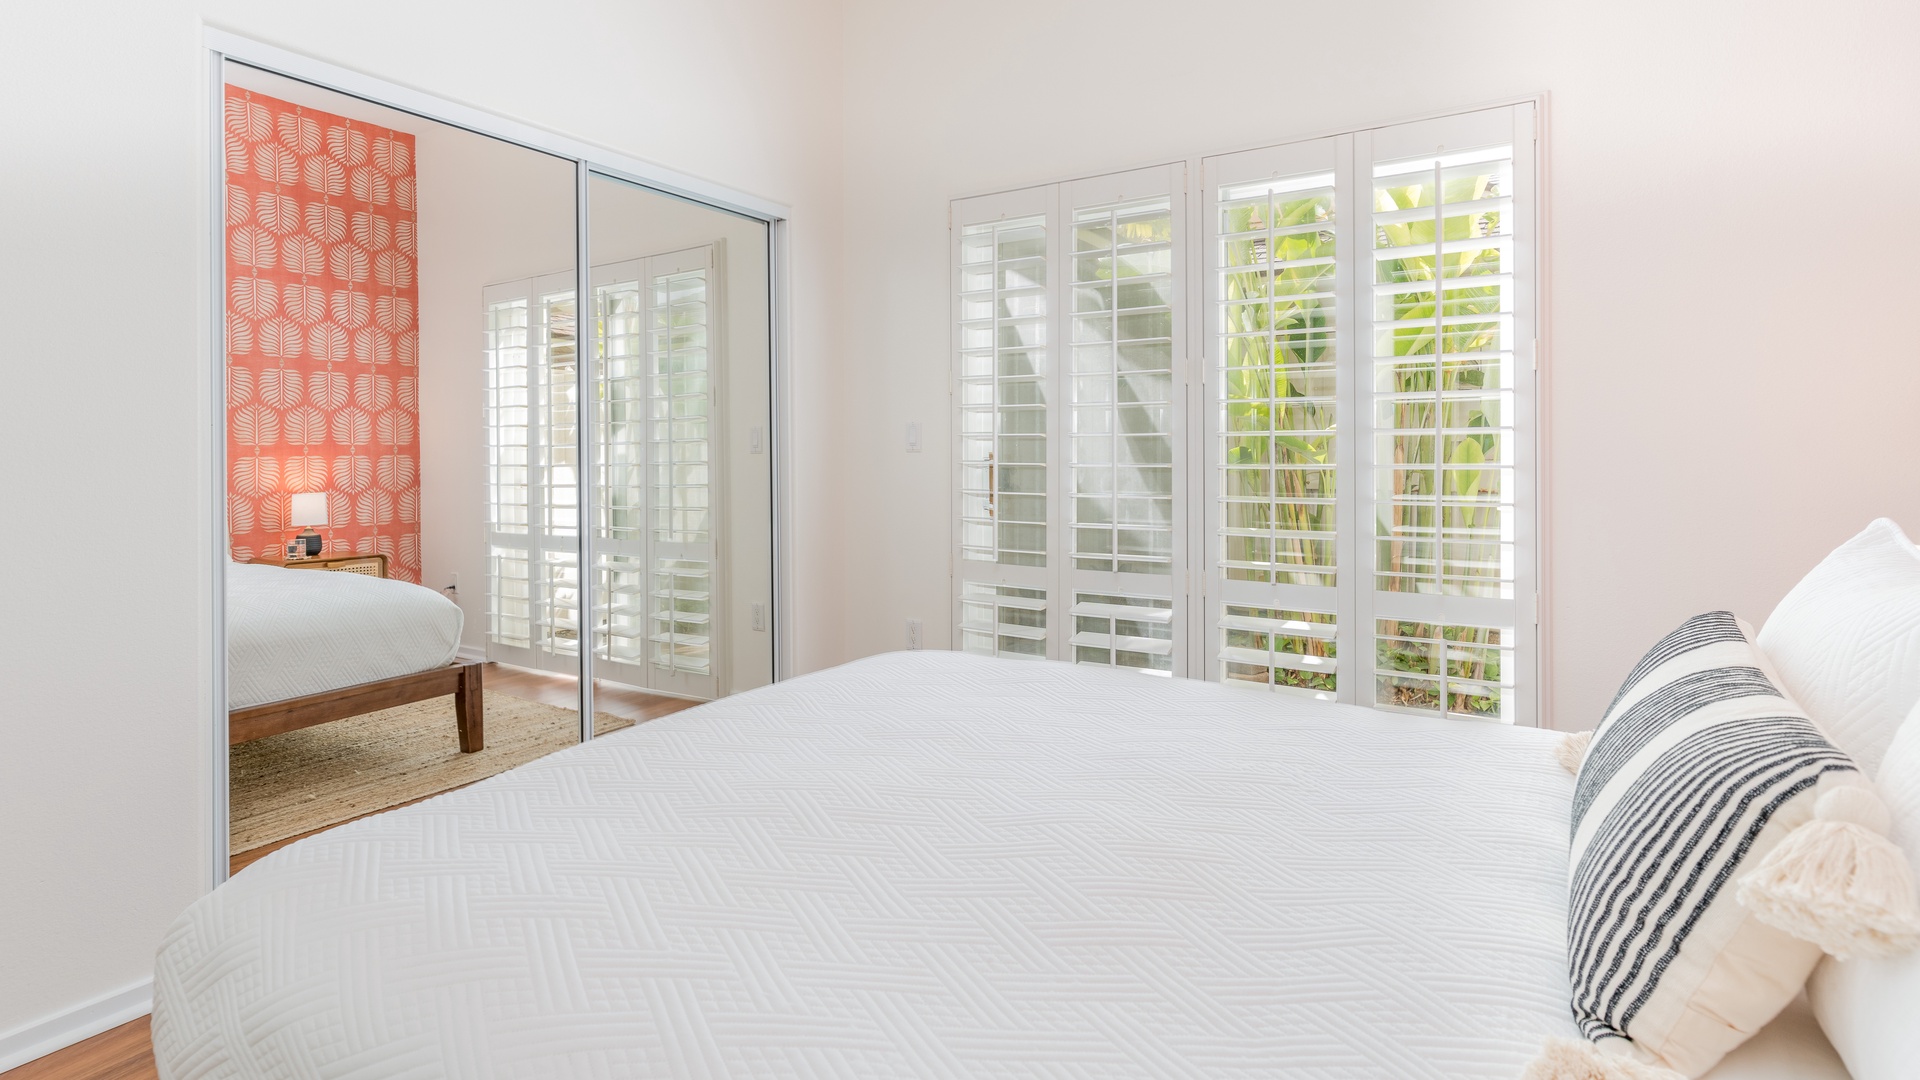 Kapolei Vacation Rentals, Coconut Plantation 1136-4 - The downstairs guest bedroom with tropical views.